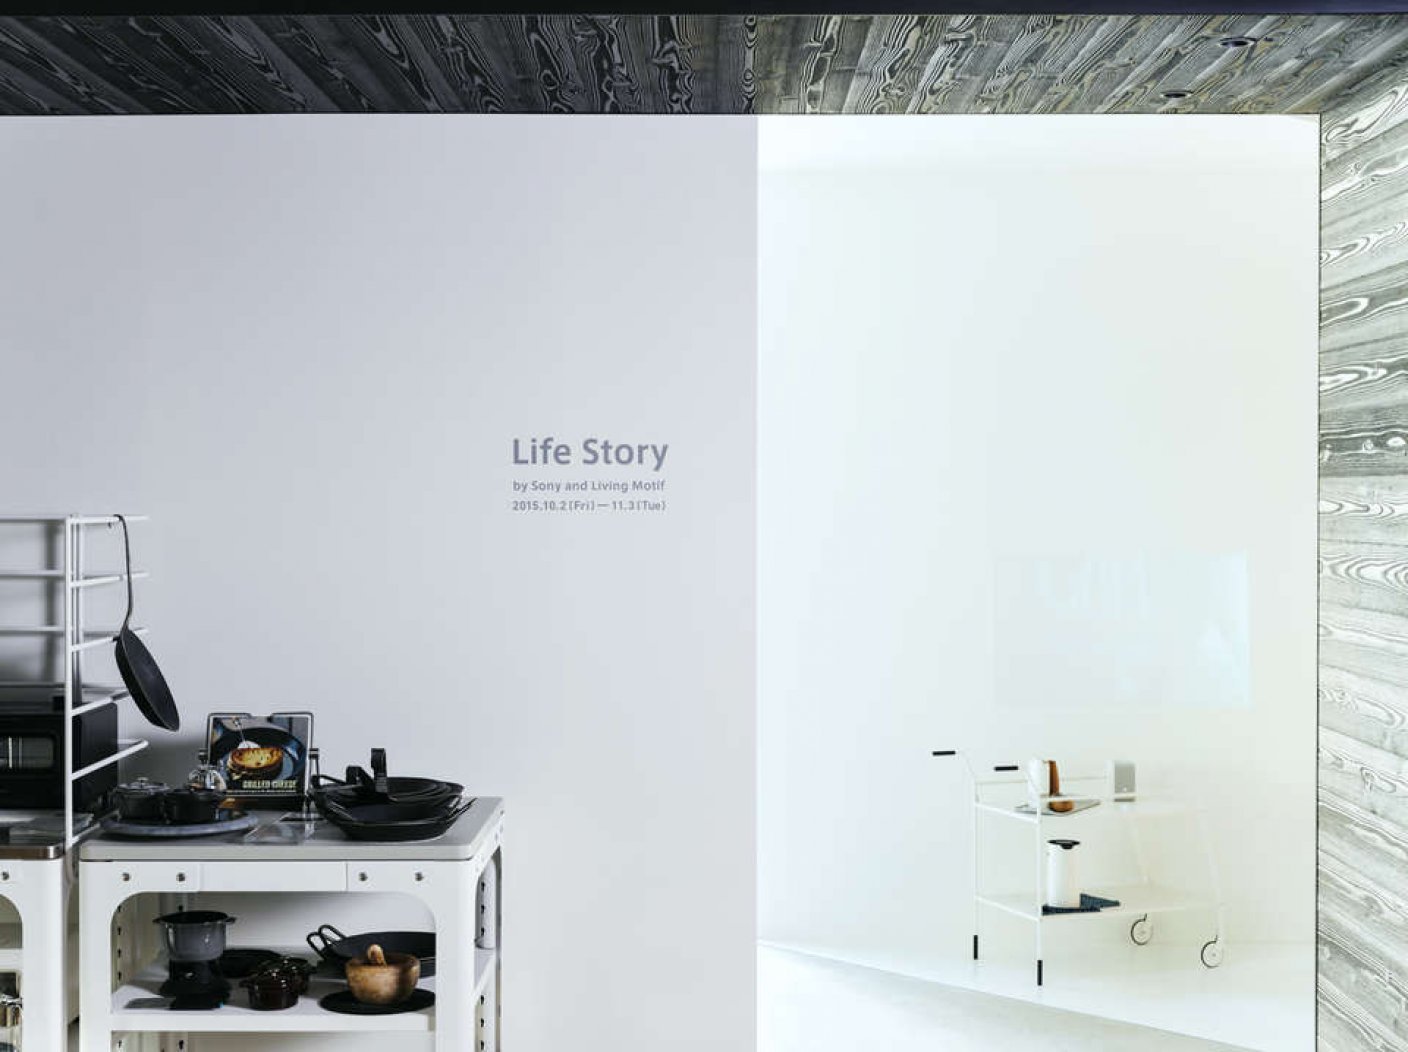 Life Story –日常を豊かに変えるLife Space UXのある生活– by Sony and Living Motifの写真 12